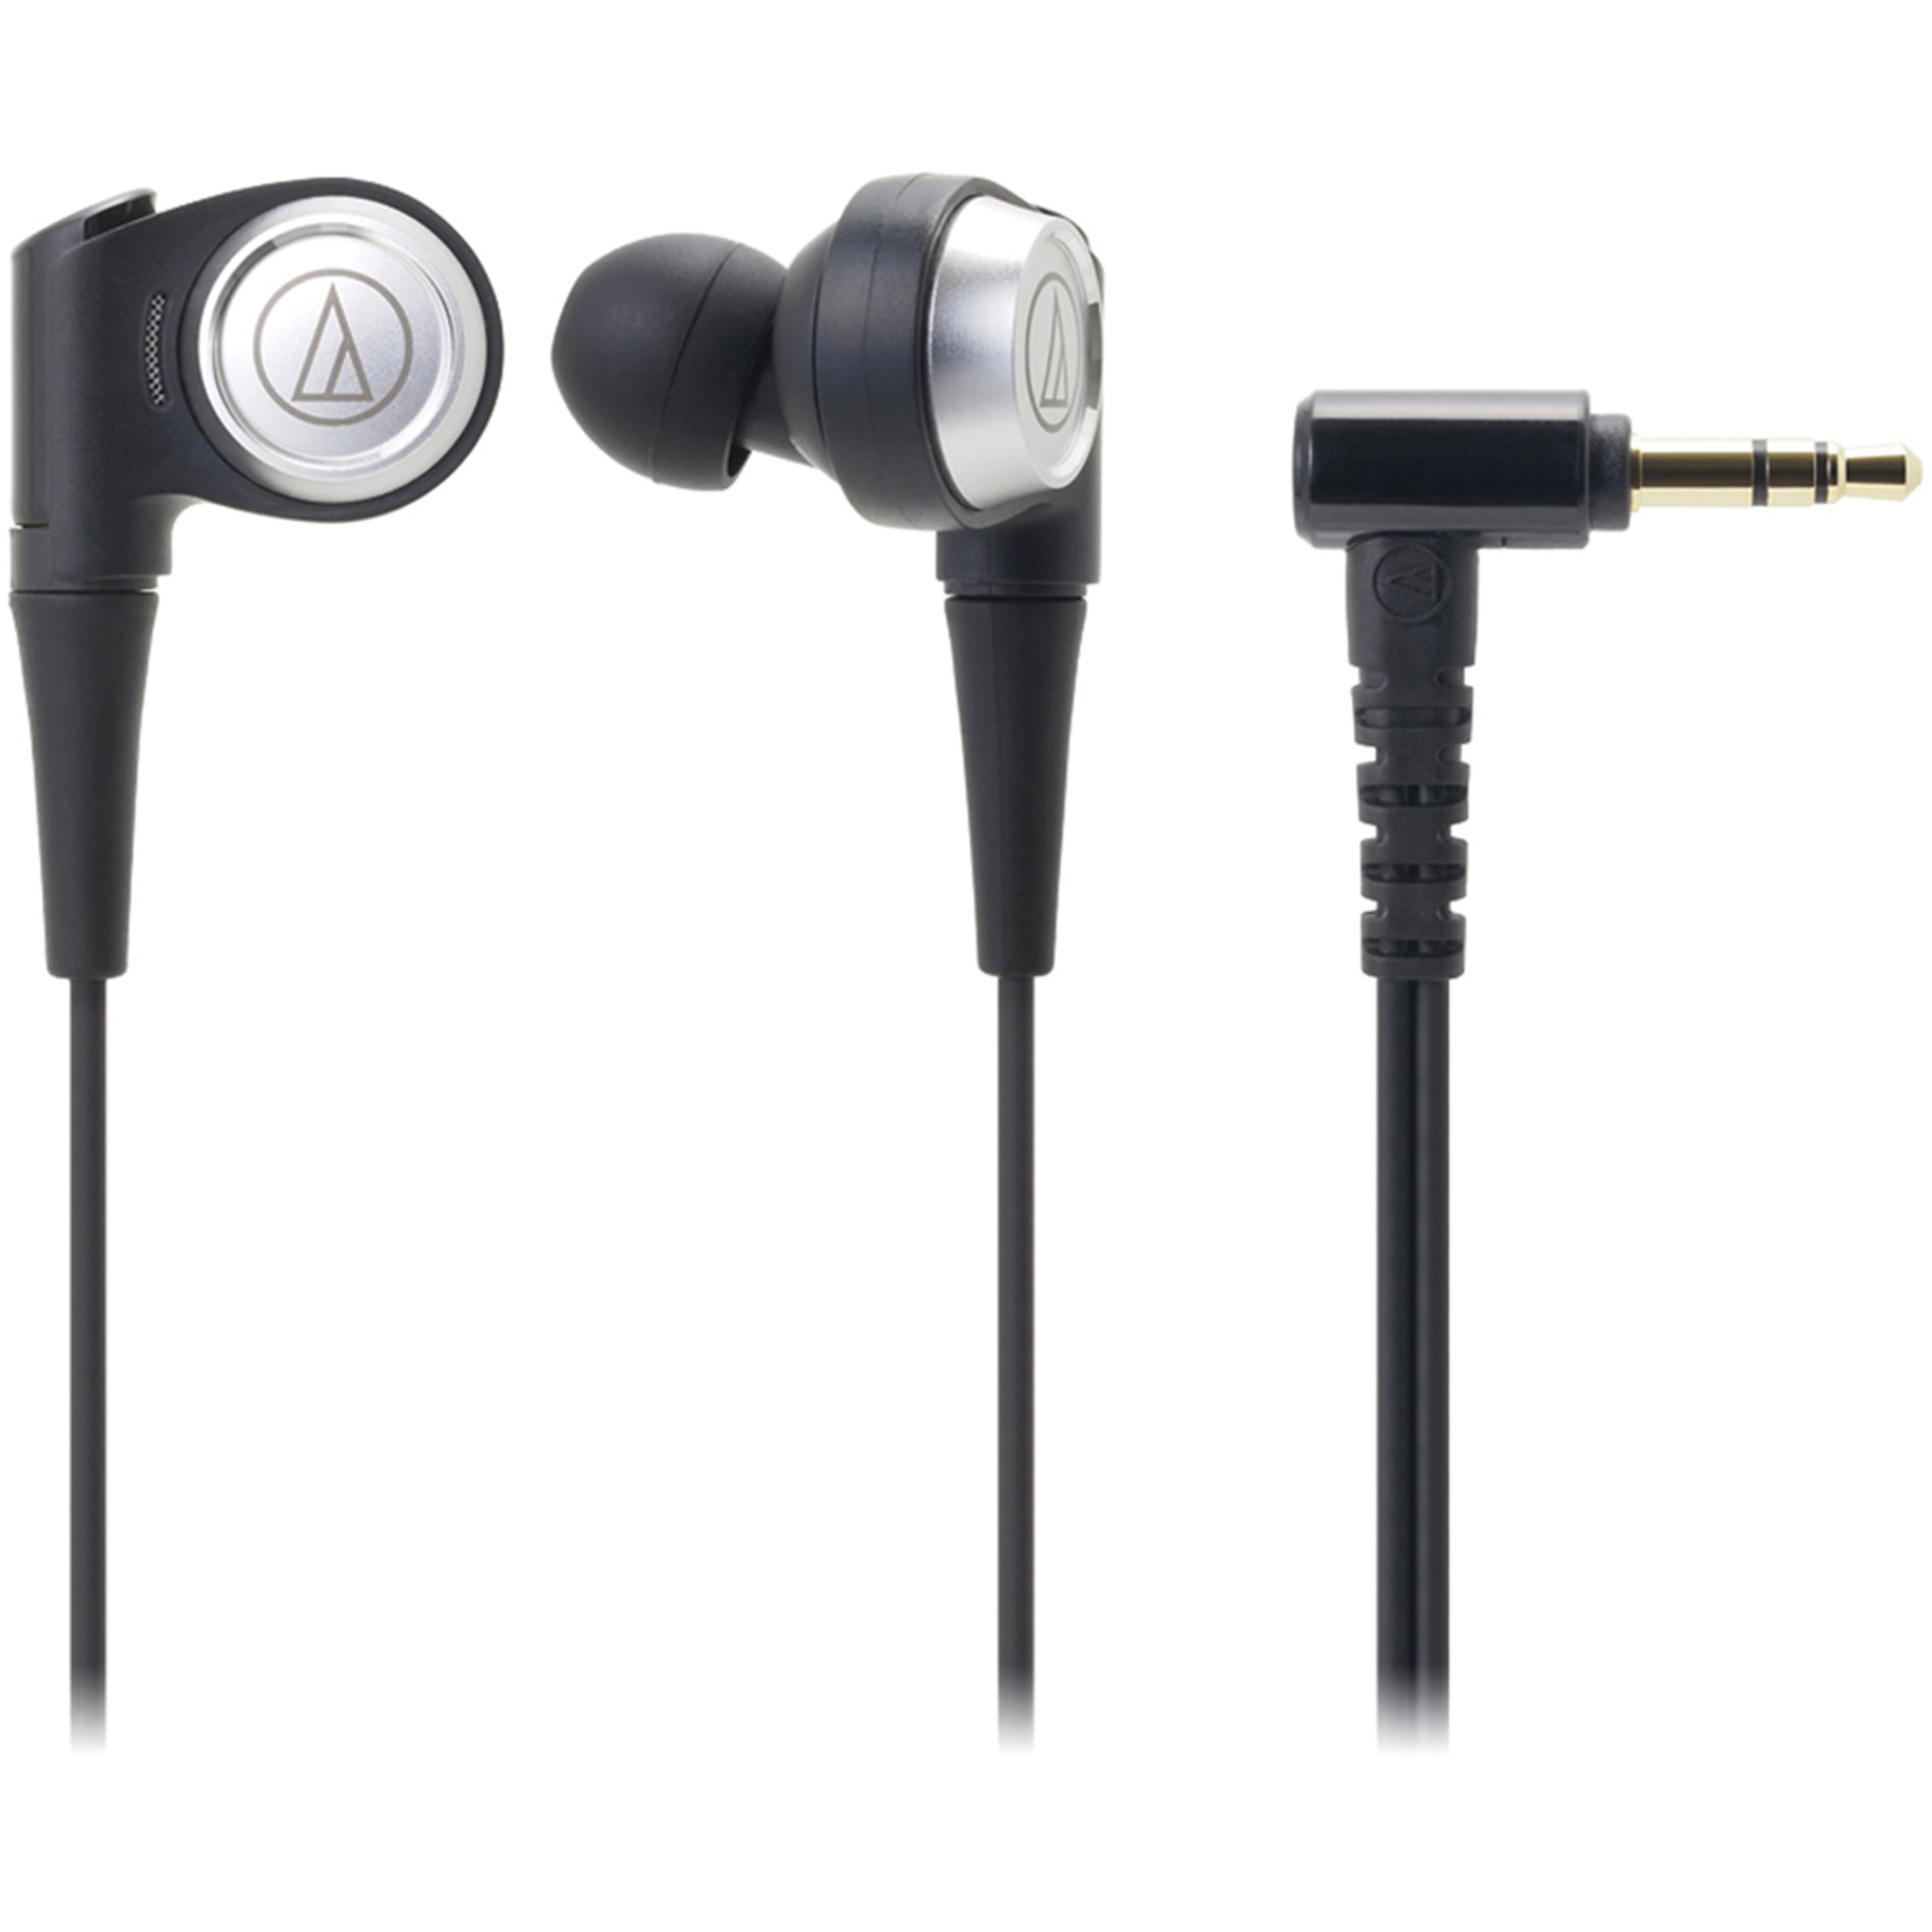 Audio-Technica ATH-CK9 SonicPro CK9 Earbuds - image 1 of 7